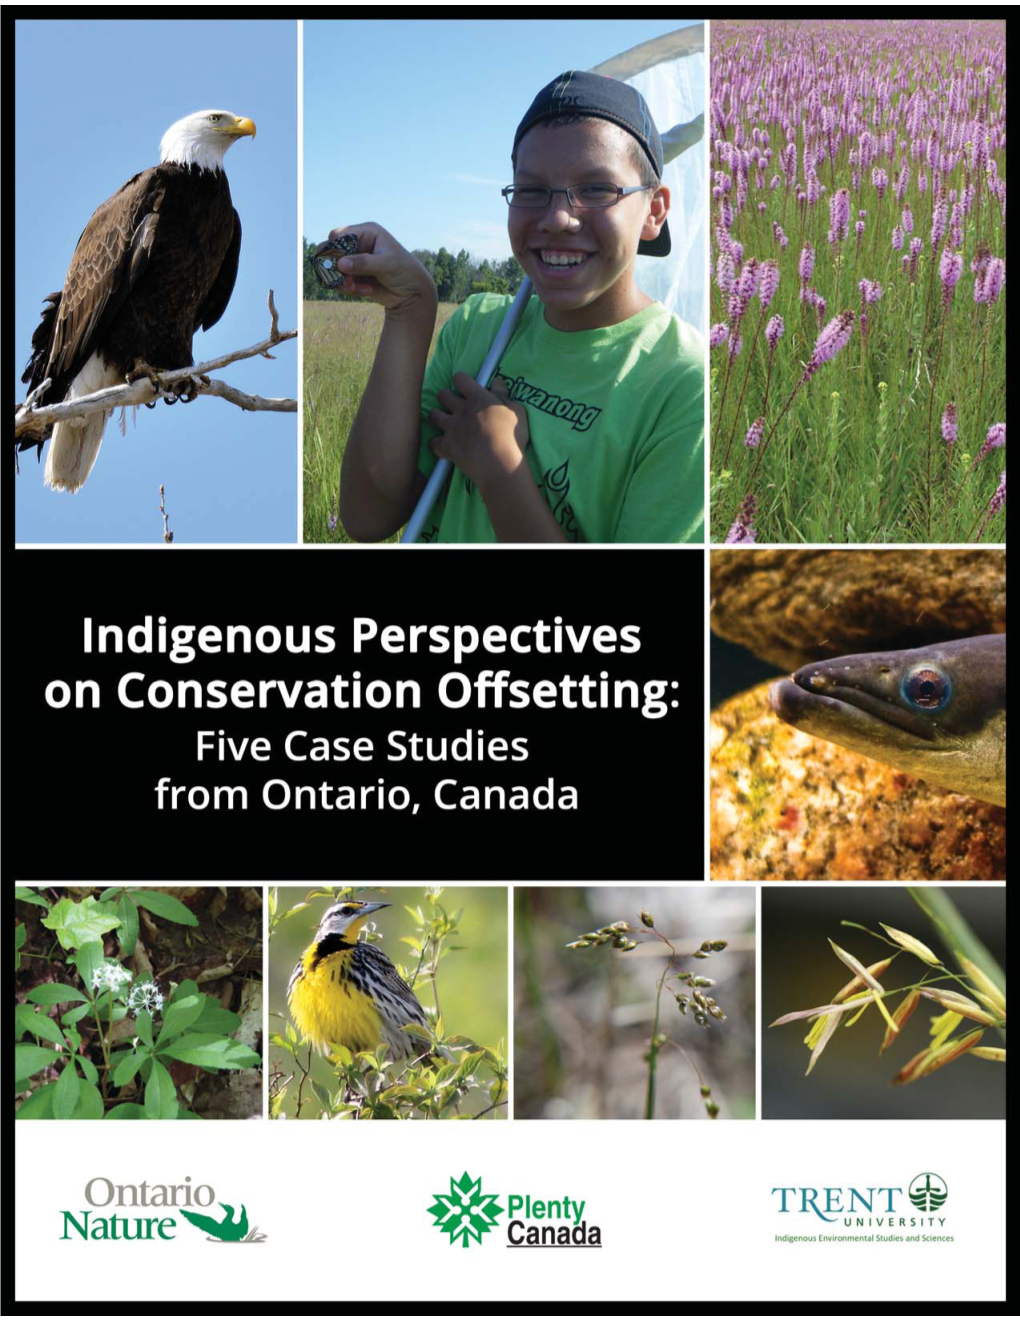 Indigenous Perspectives on Conservation Offsetting: Five Case Studies from Ontario, Canada